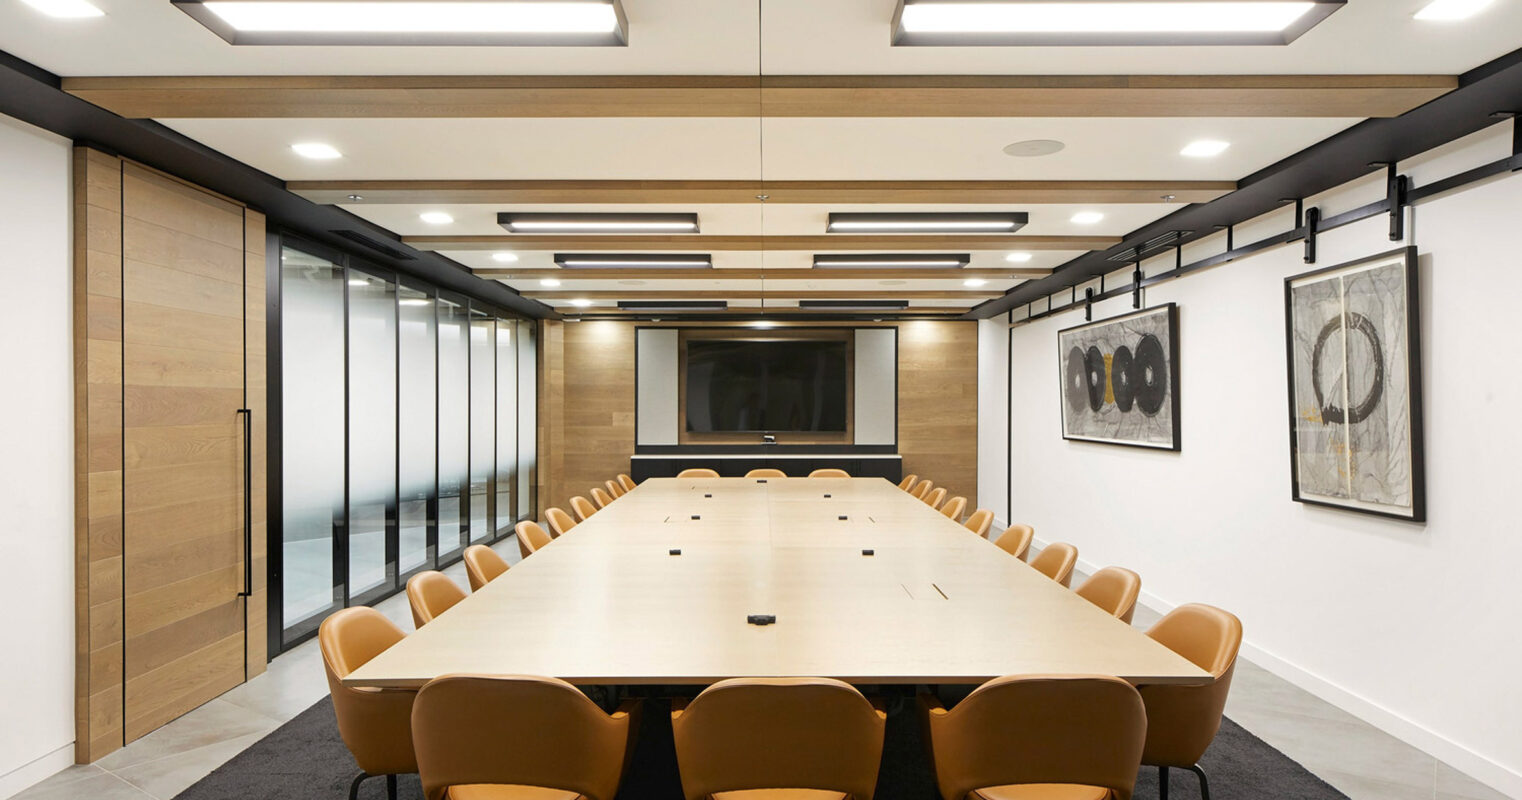 Modern conference room featuring a long rectangular table with plush orange chairs, wood paneling on walls, recessed and track lighting, accompanied by a flush-mounted video screen and framed art pieces.